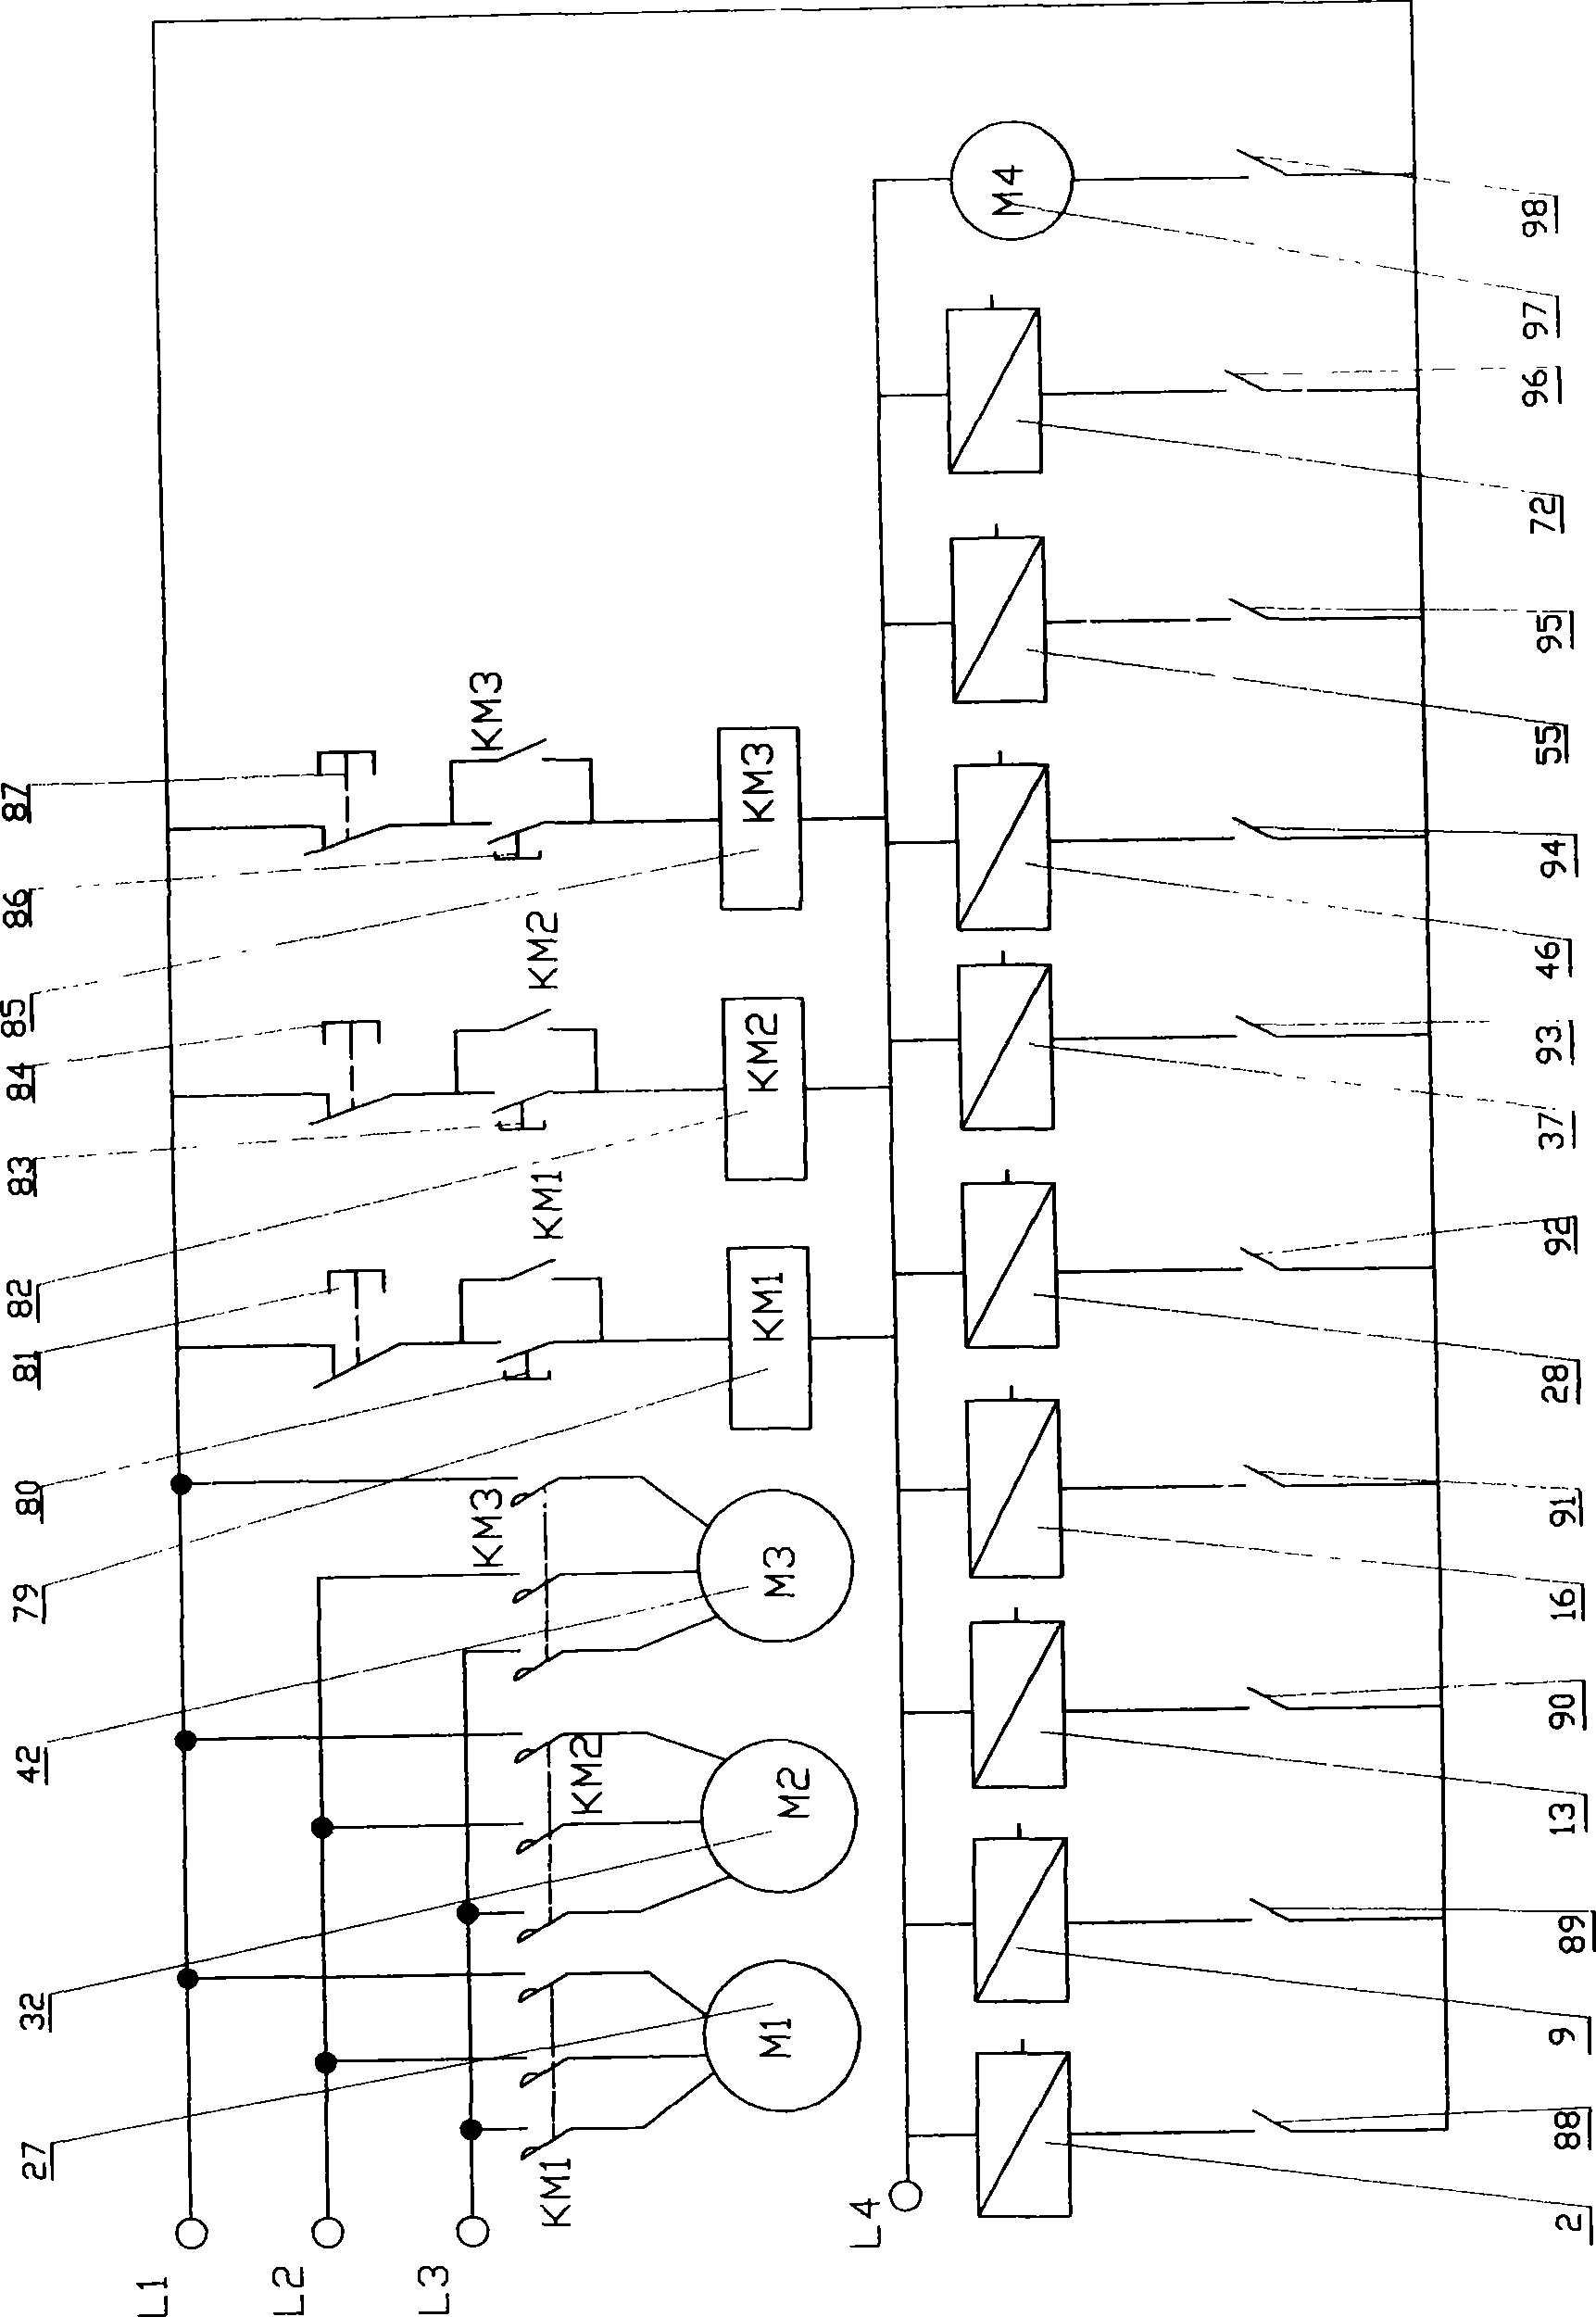 Process method for digesting plant oil by using carbon dioxide